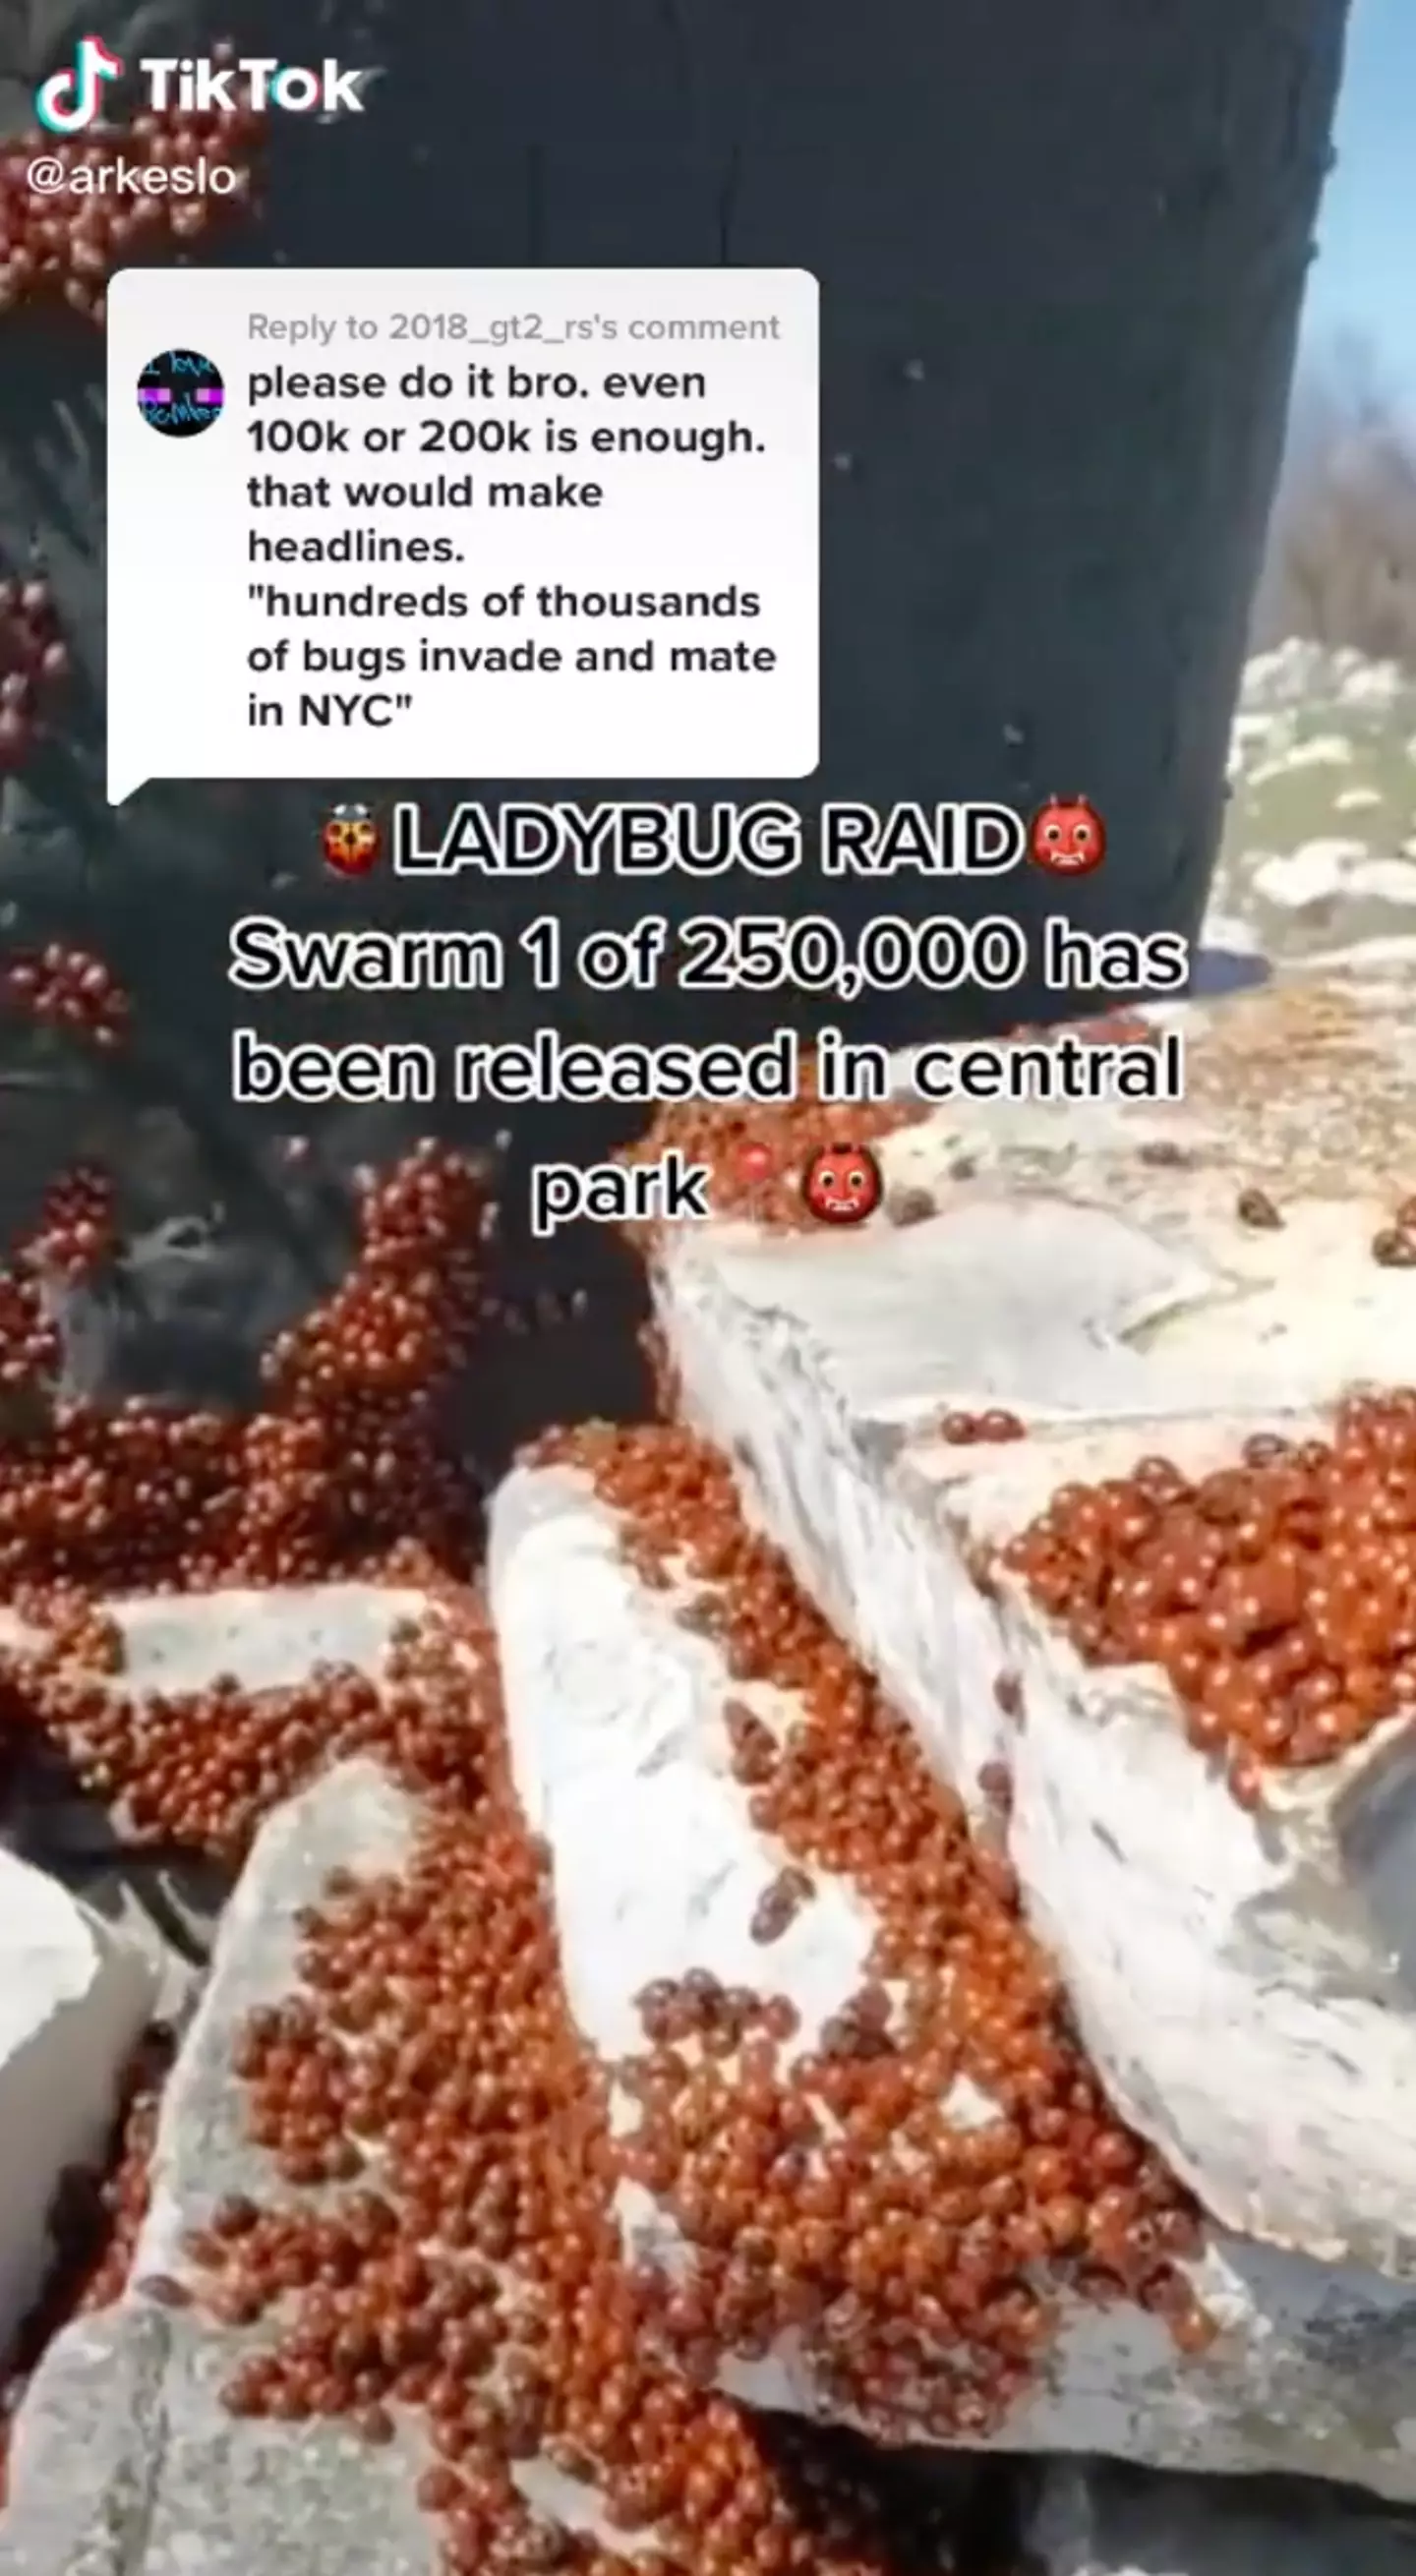 Another TikToker claimed to have released hundreds of thousands of ladybirds in Central Park.